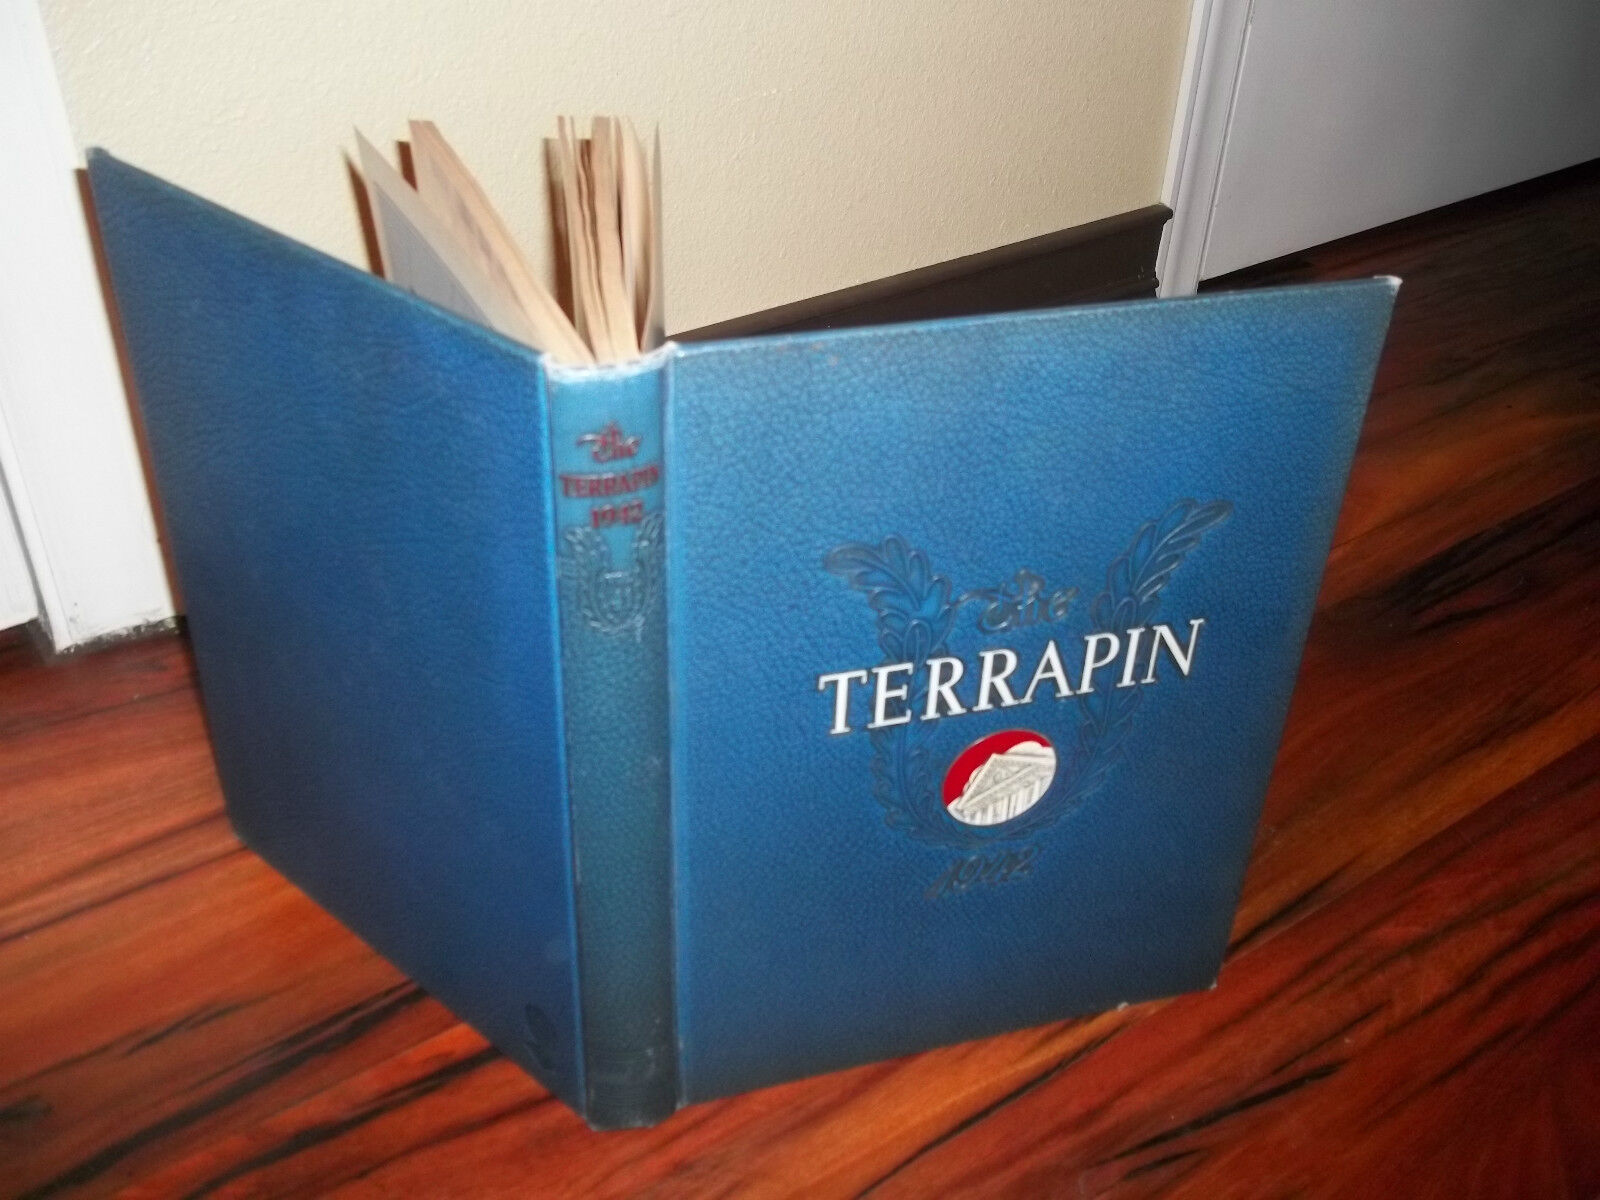 The Terrapin 1942 University of Maryland College Park Maryland yearbook